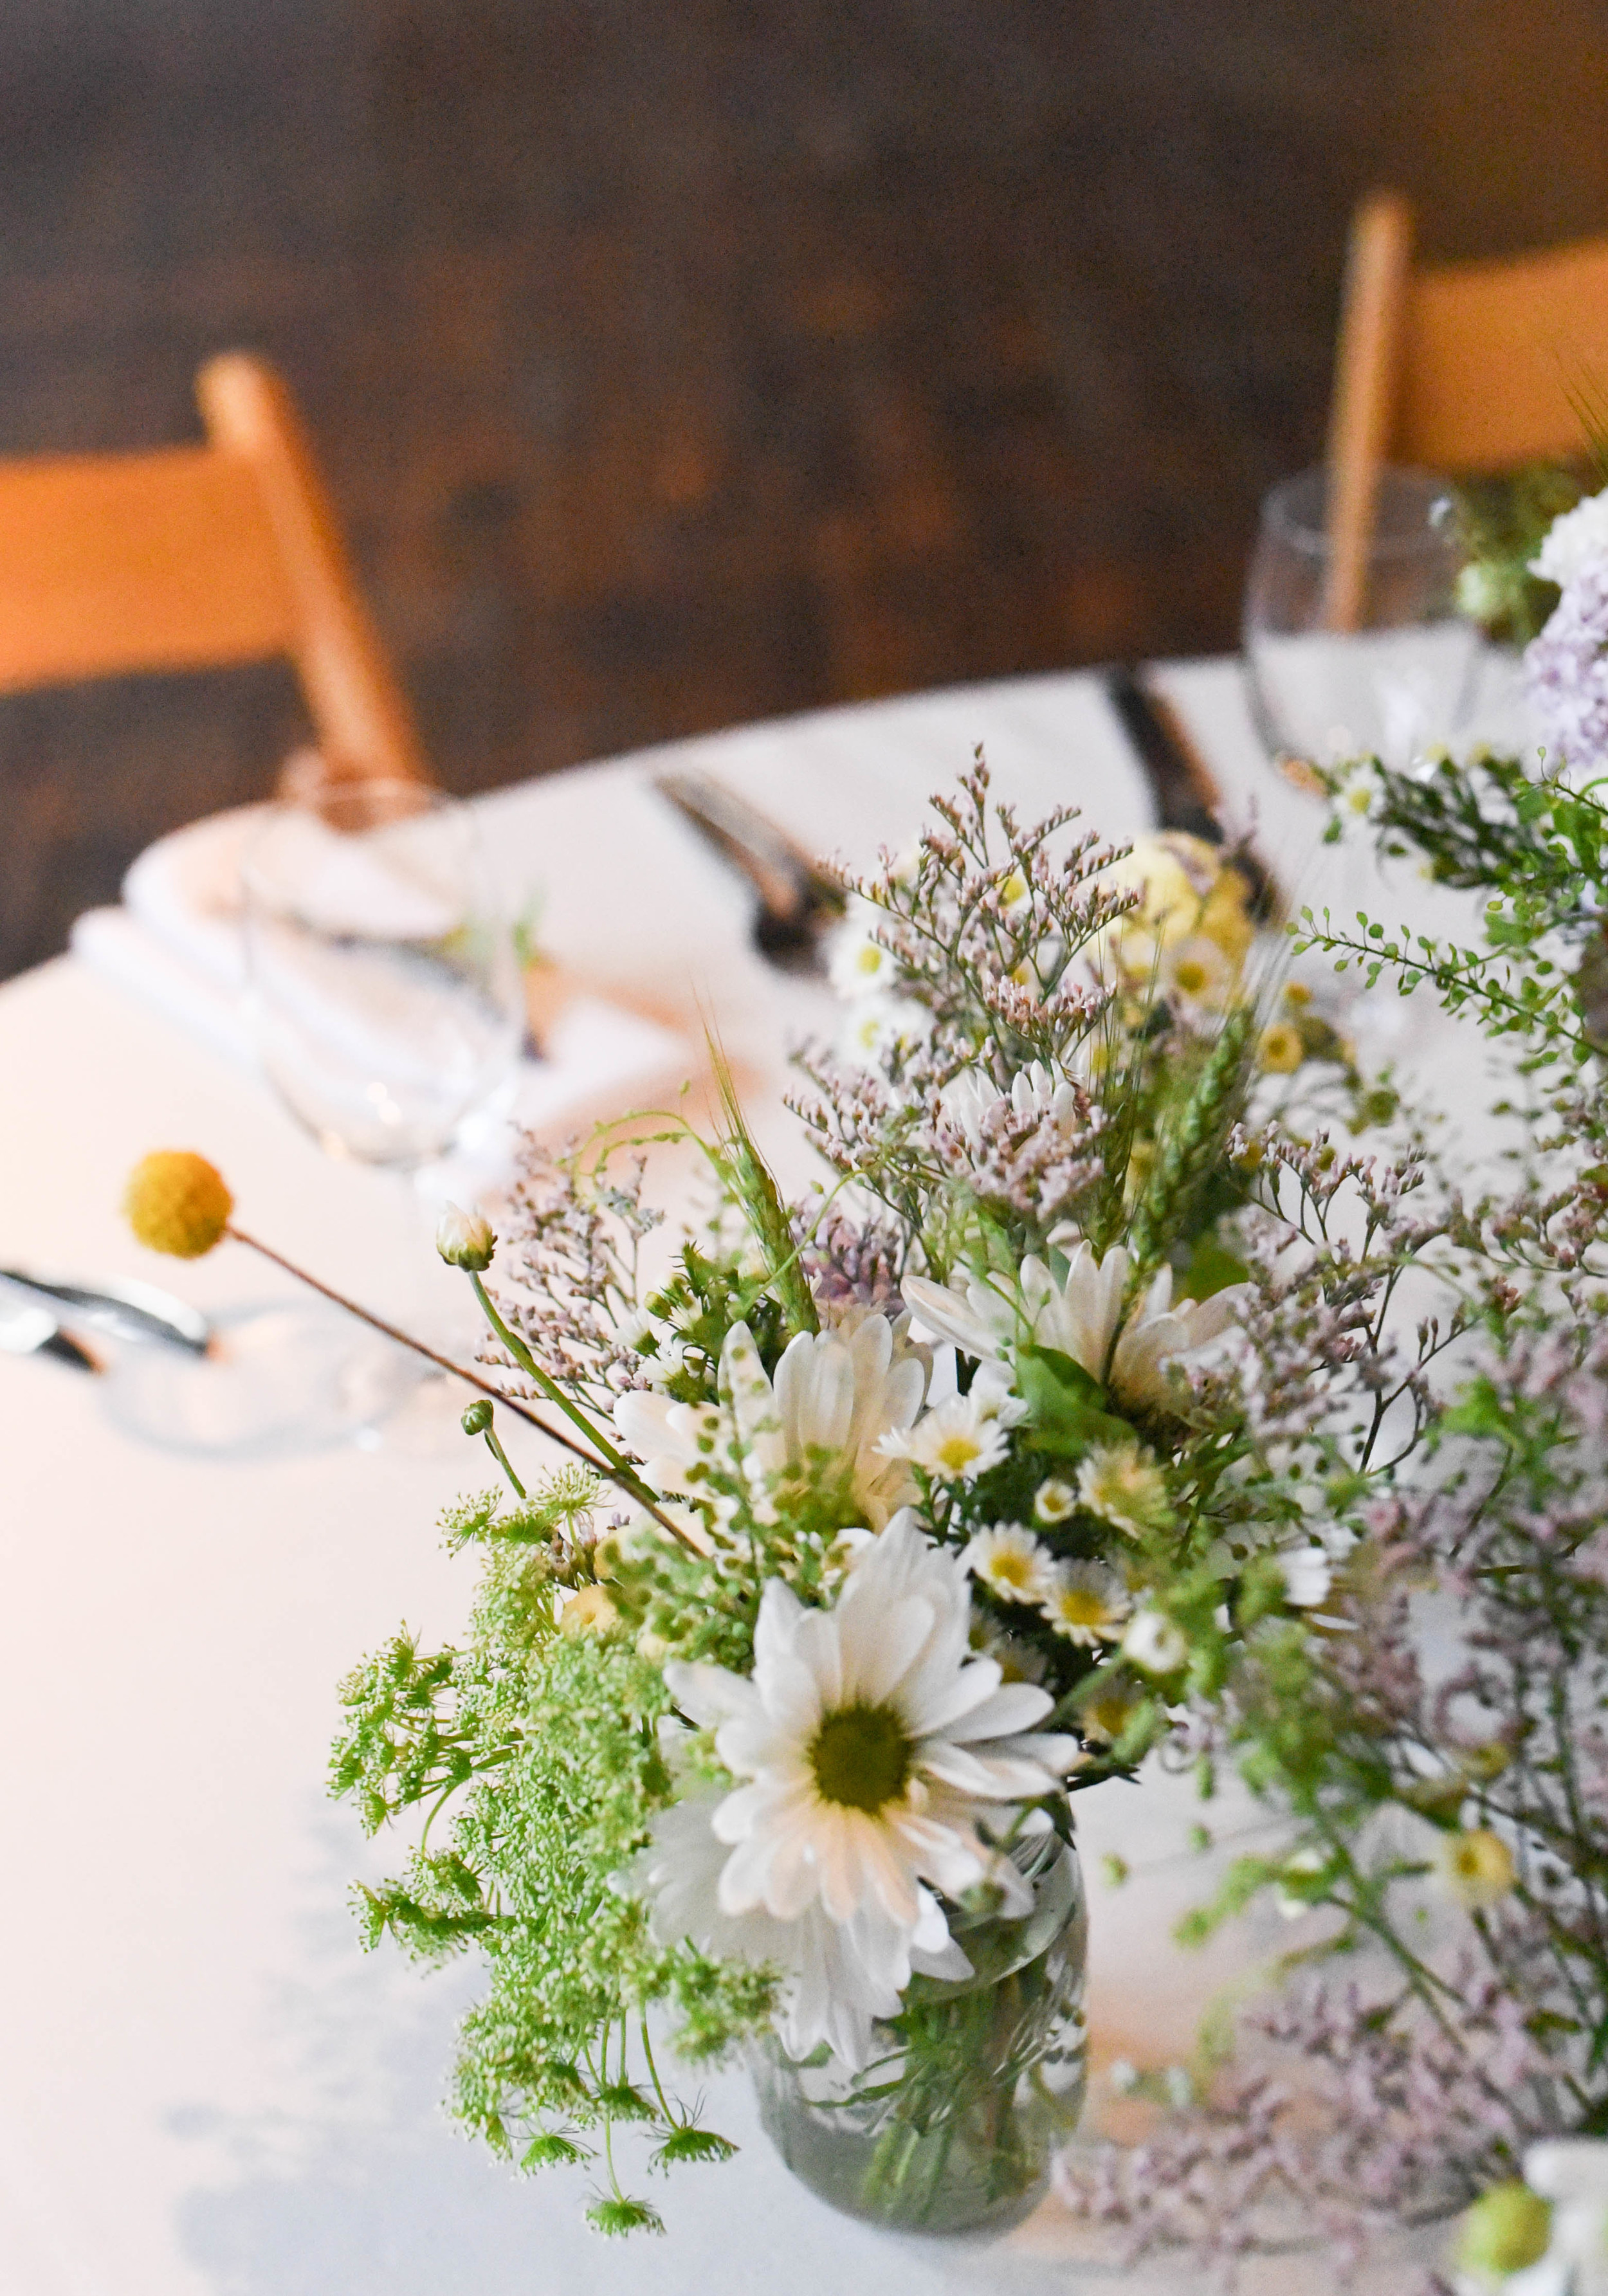 Rustic wedding flowers at the Greenpoint Loft